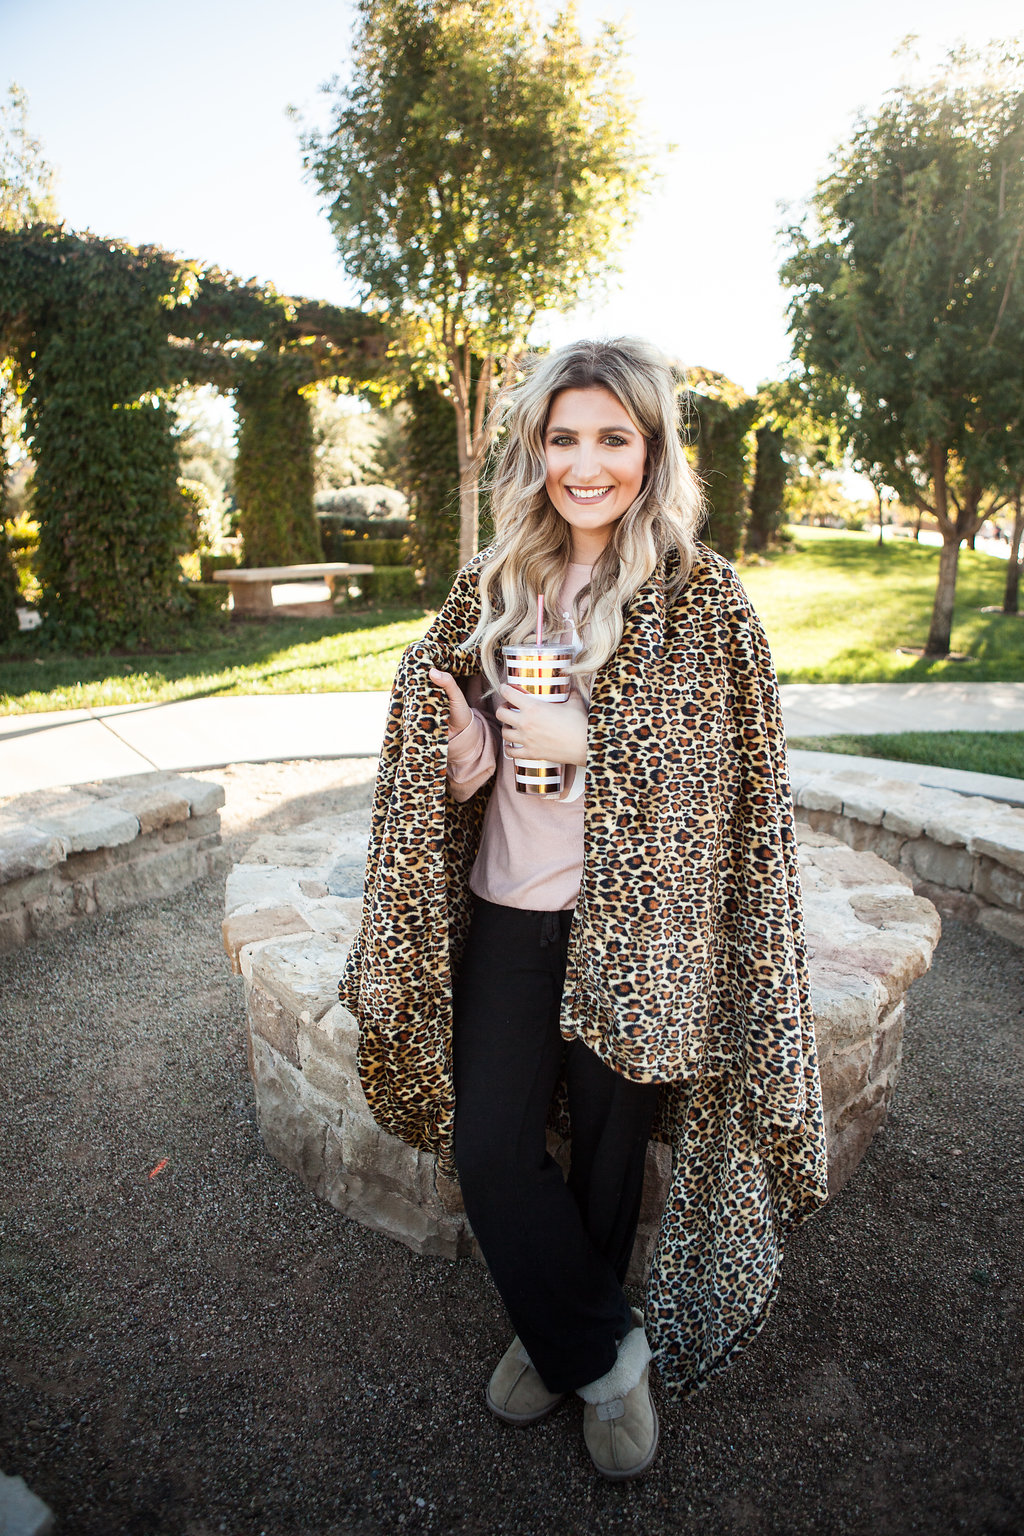 5 Ways I like to Relax | PediPocket | Lubbock life | Audrey Madison Stowe a fashion and lifestyle blogger - 5 Ways To Relax with PediPocket by popular Texas lifestyle blogger, Audrey Madison Stowe